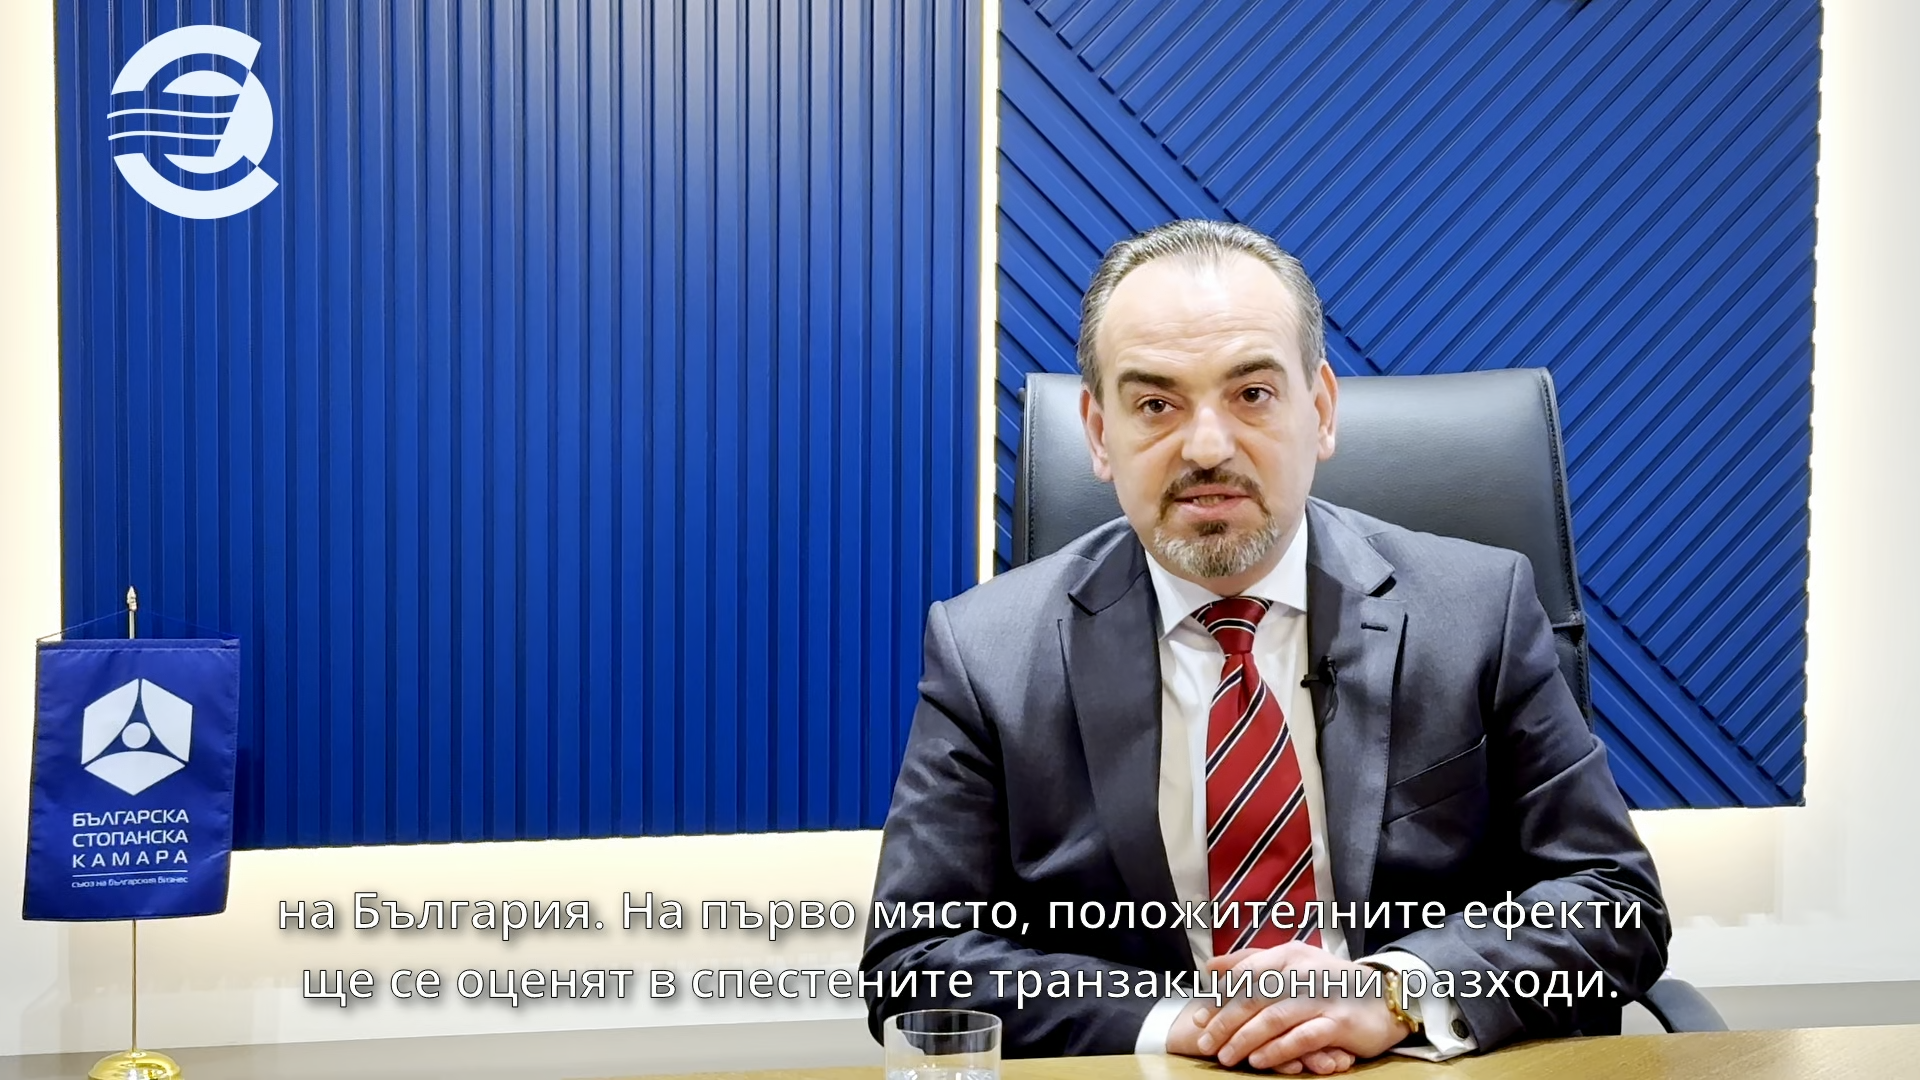 Dobri Mitrev, Chairman of the Management Board of the Bulgarian Industrial Association: Bulgaria's eurozone membership will give a new horizon and stimulus to Bulgaria's economy and industry